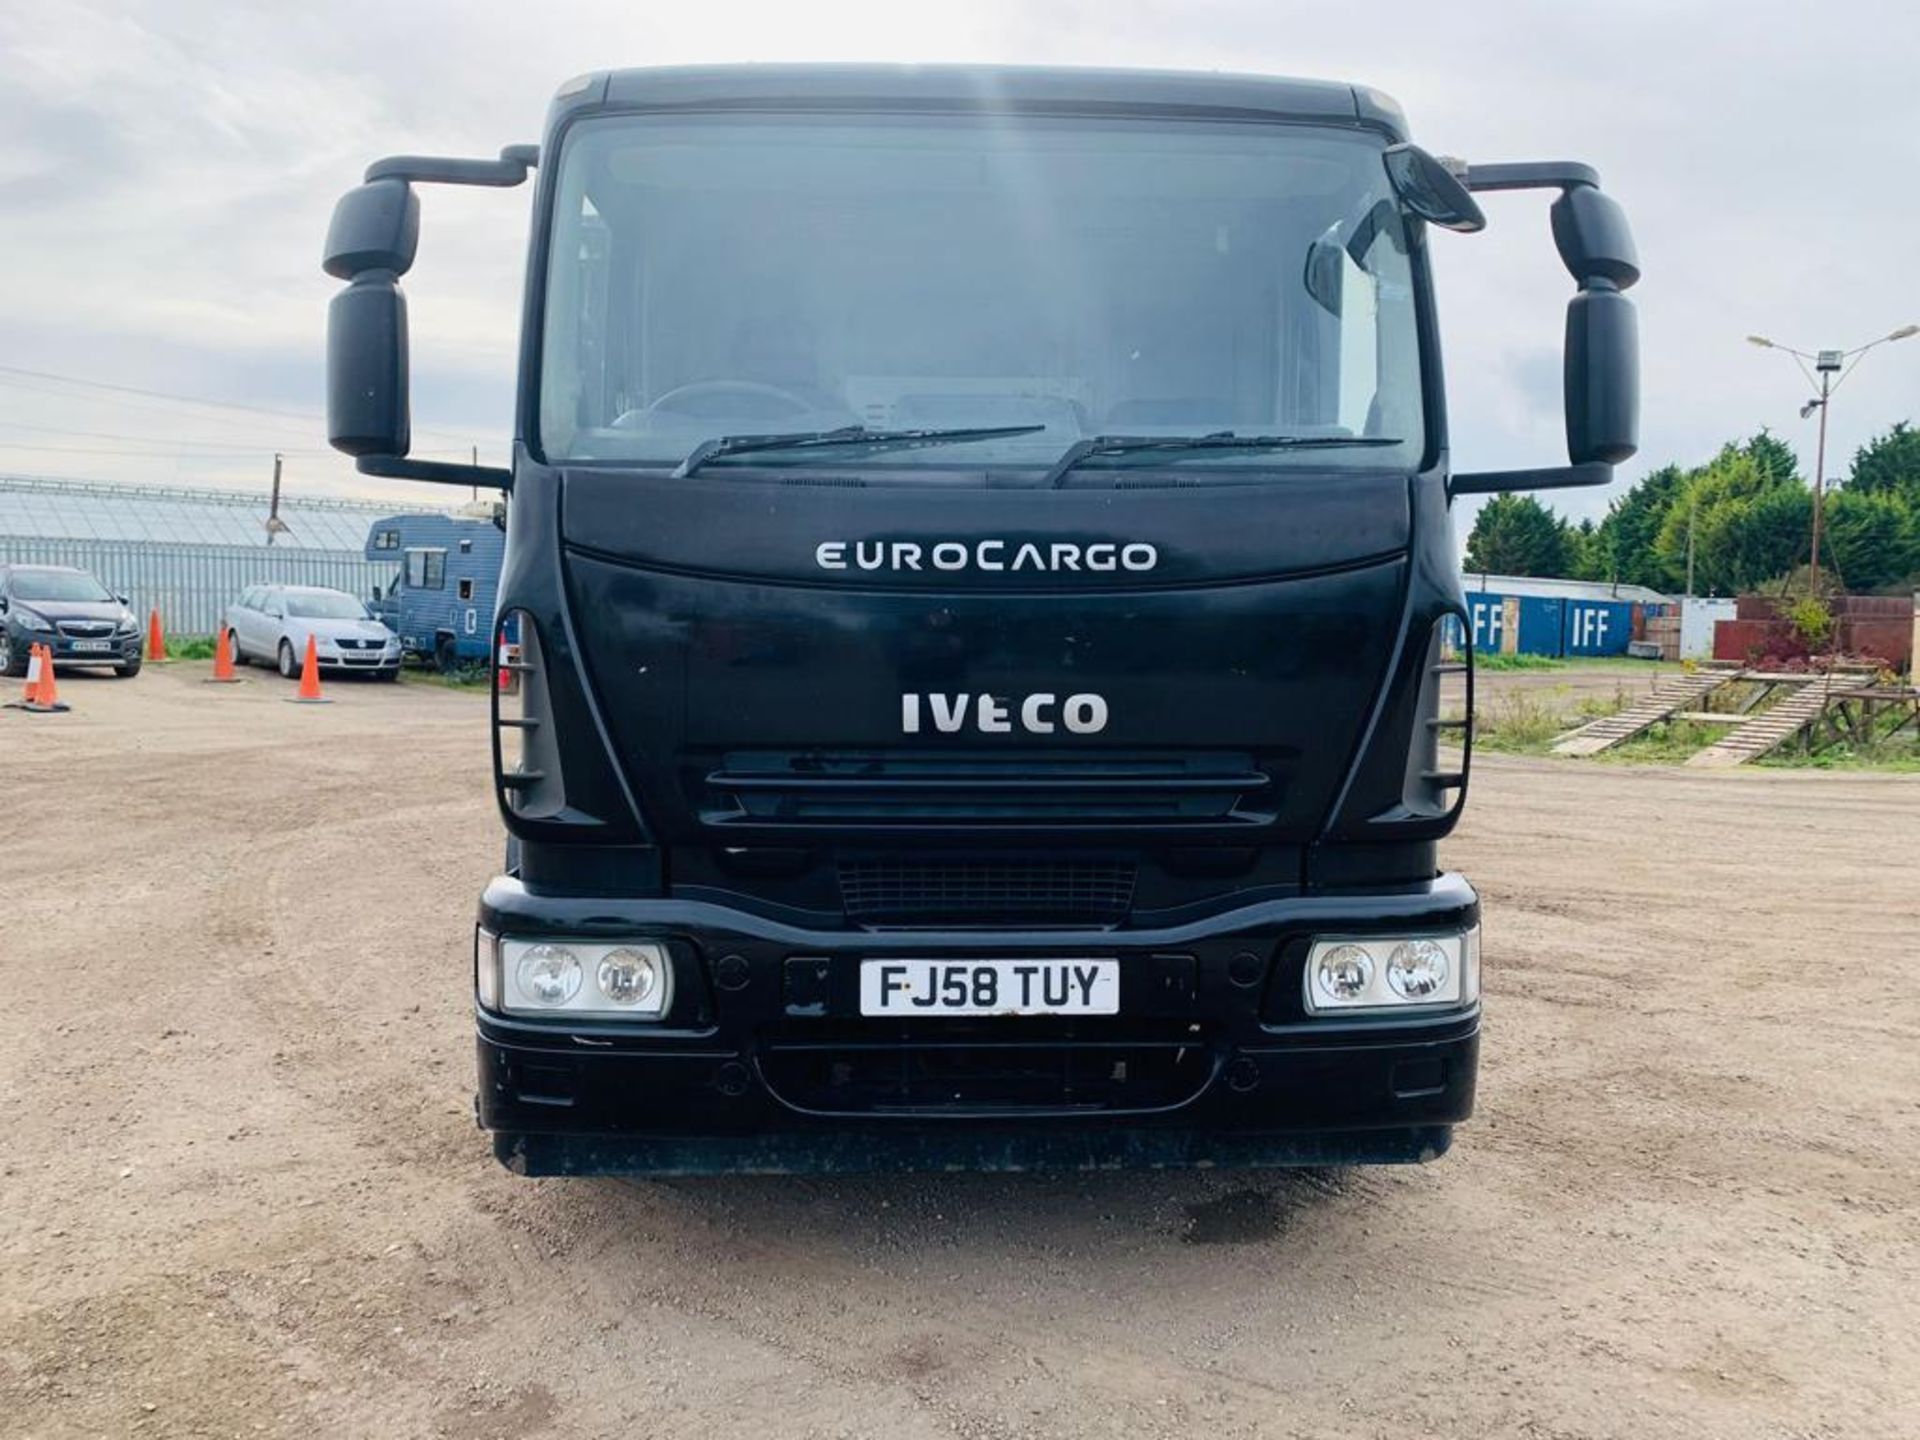 (RESERVE MET) Iveco Eurocargo 180E25 - 2009 Year - 18 Tonne - 4x2 - Day Cab Truck - Image 3 of 11